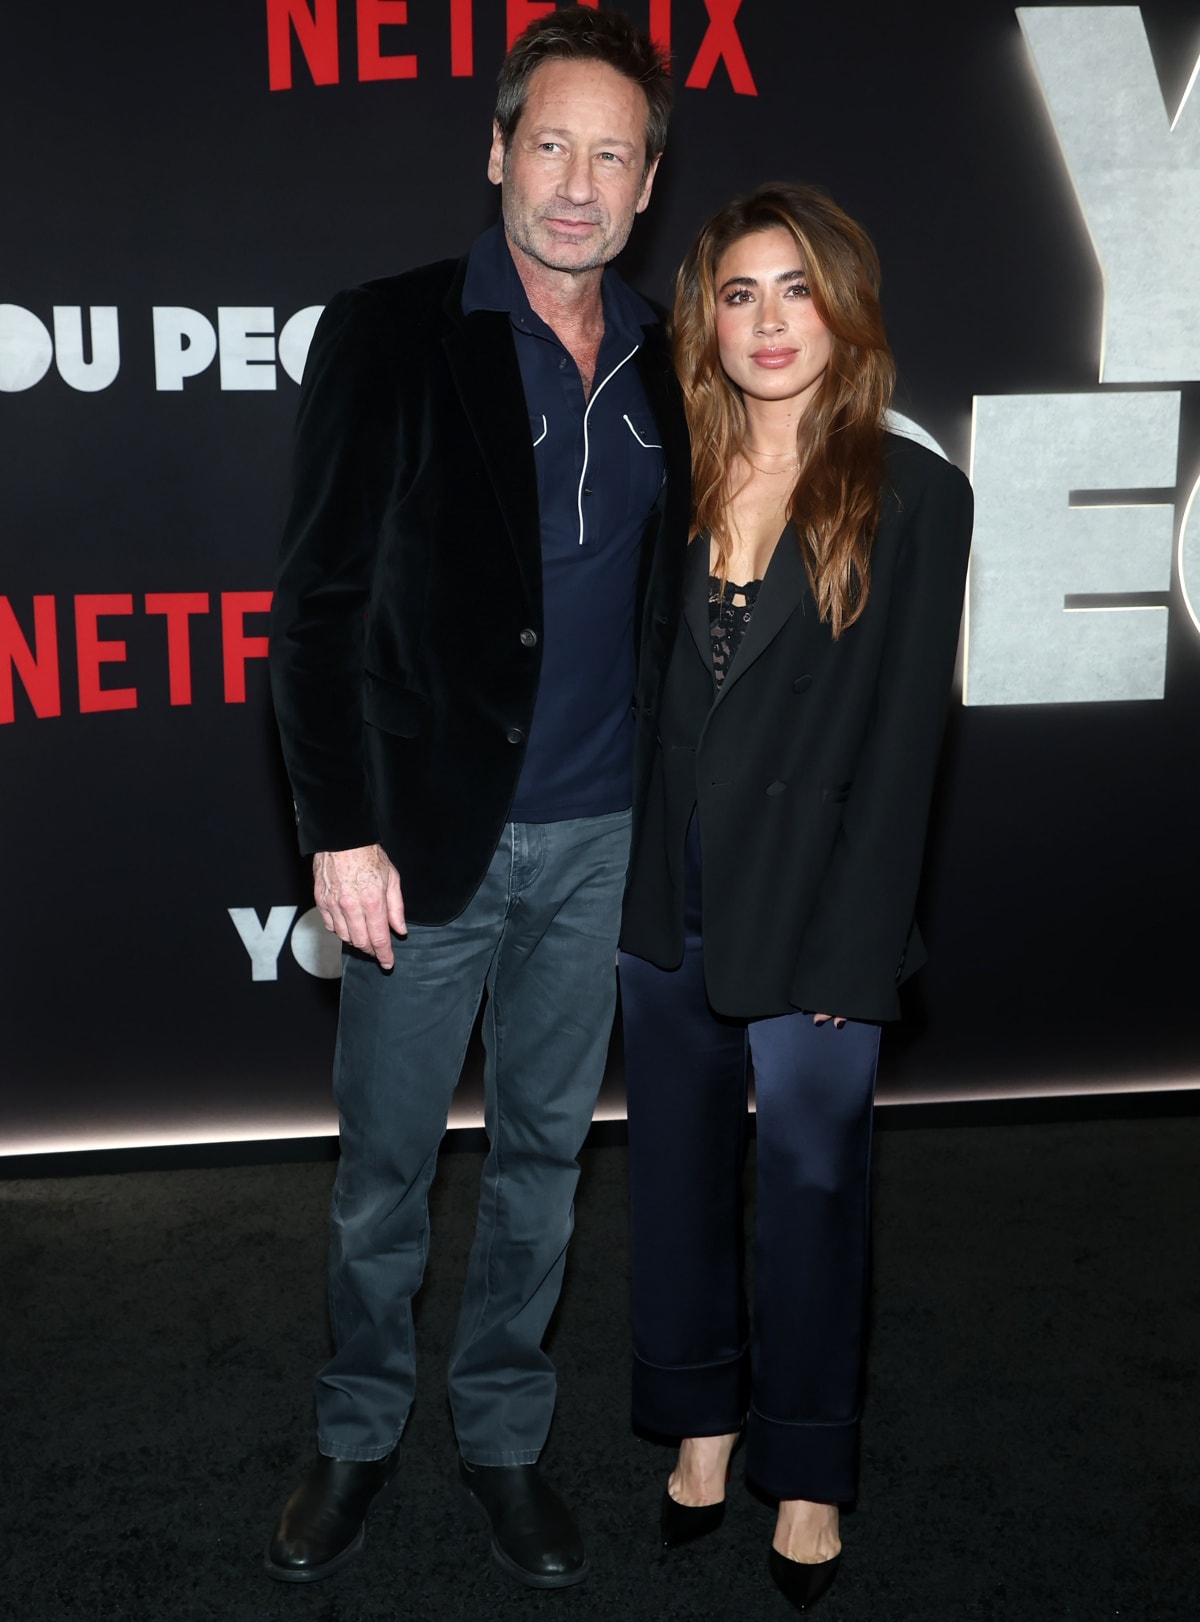 David Duchovny with younger girlfriend Monique Pendleberry at the premiere of You People